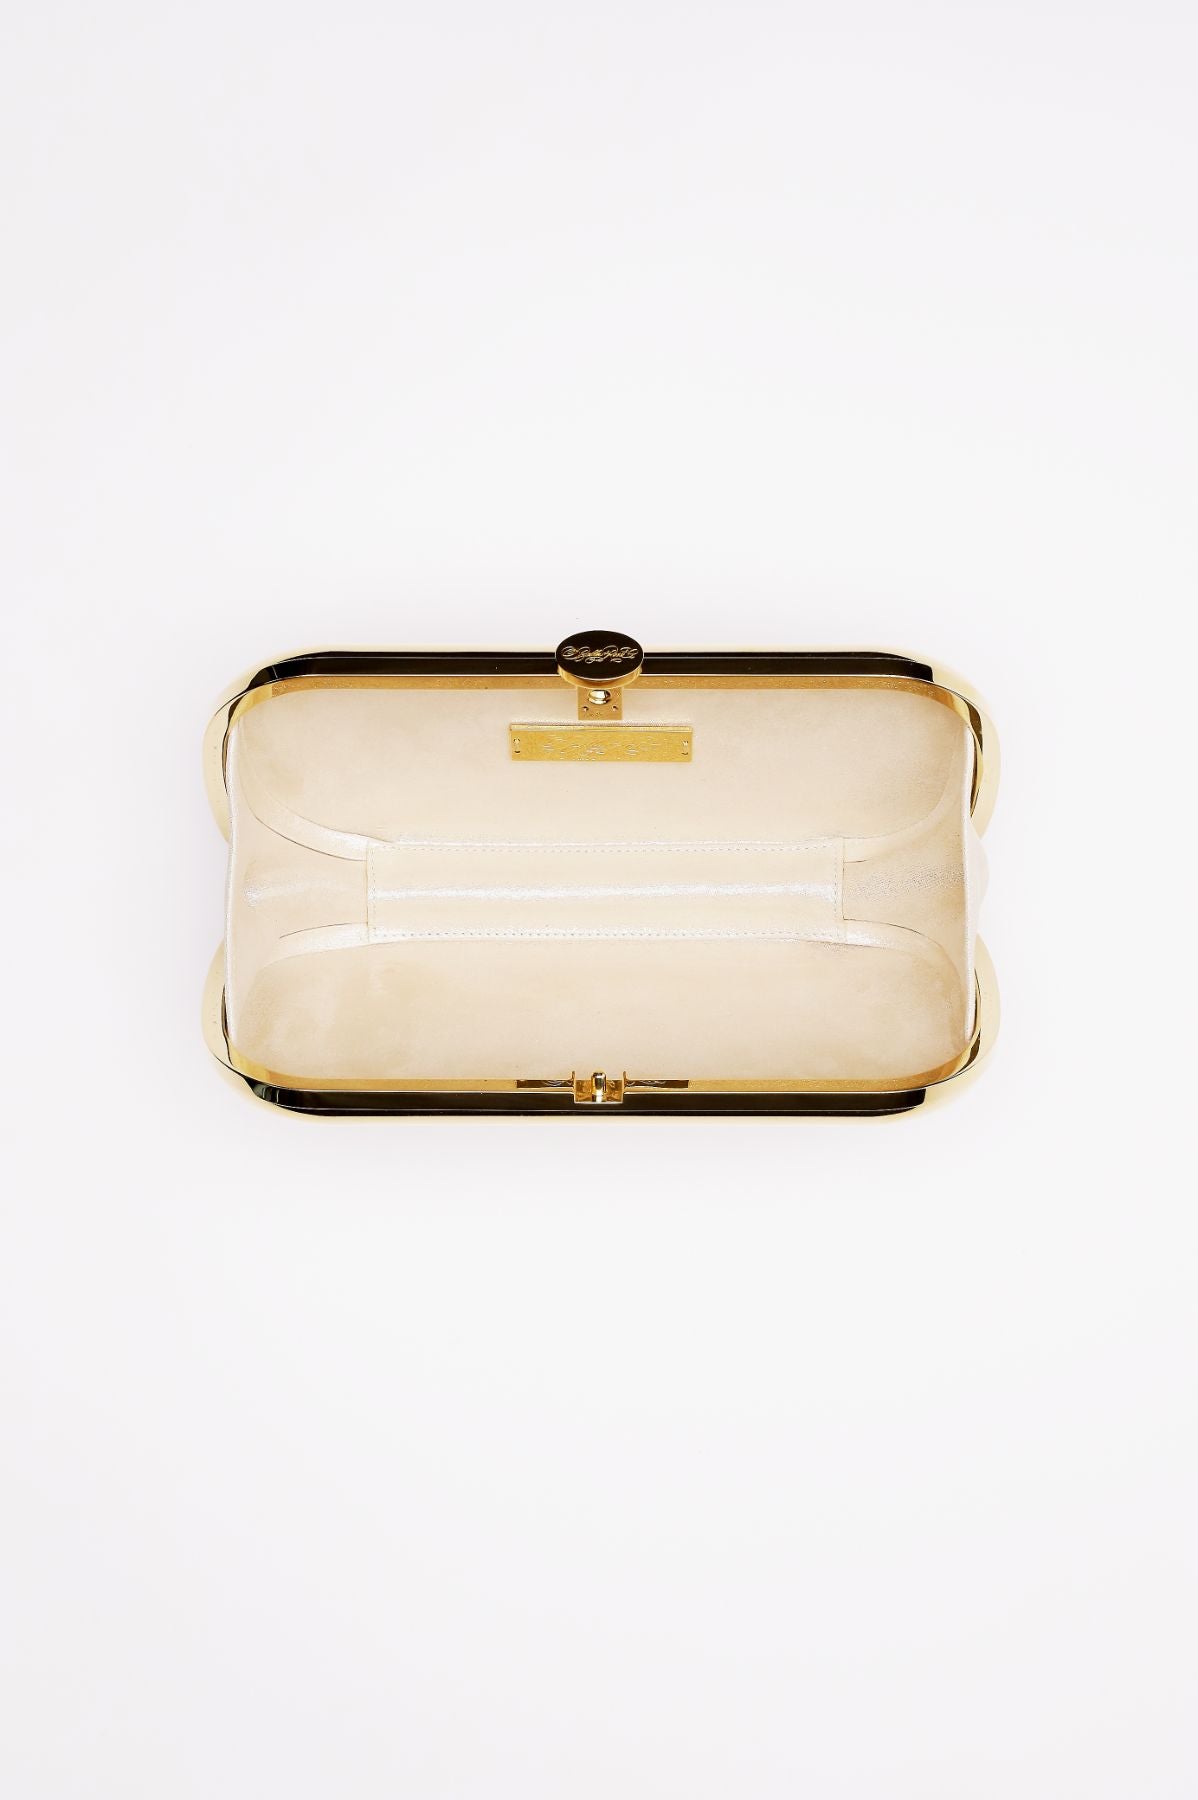 A Bella Clutch Golden Petite by The Bella Rosa Collection with a metallic clasp on a white background.